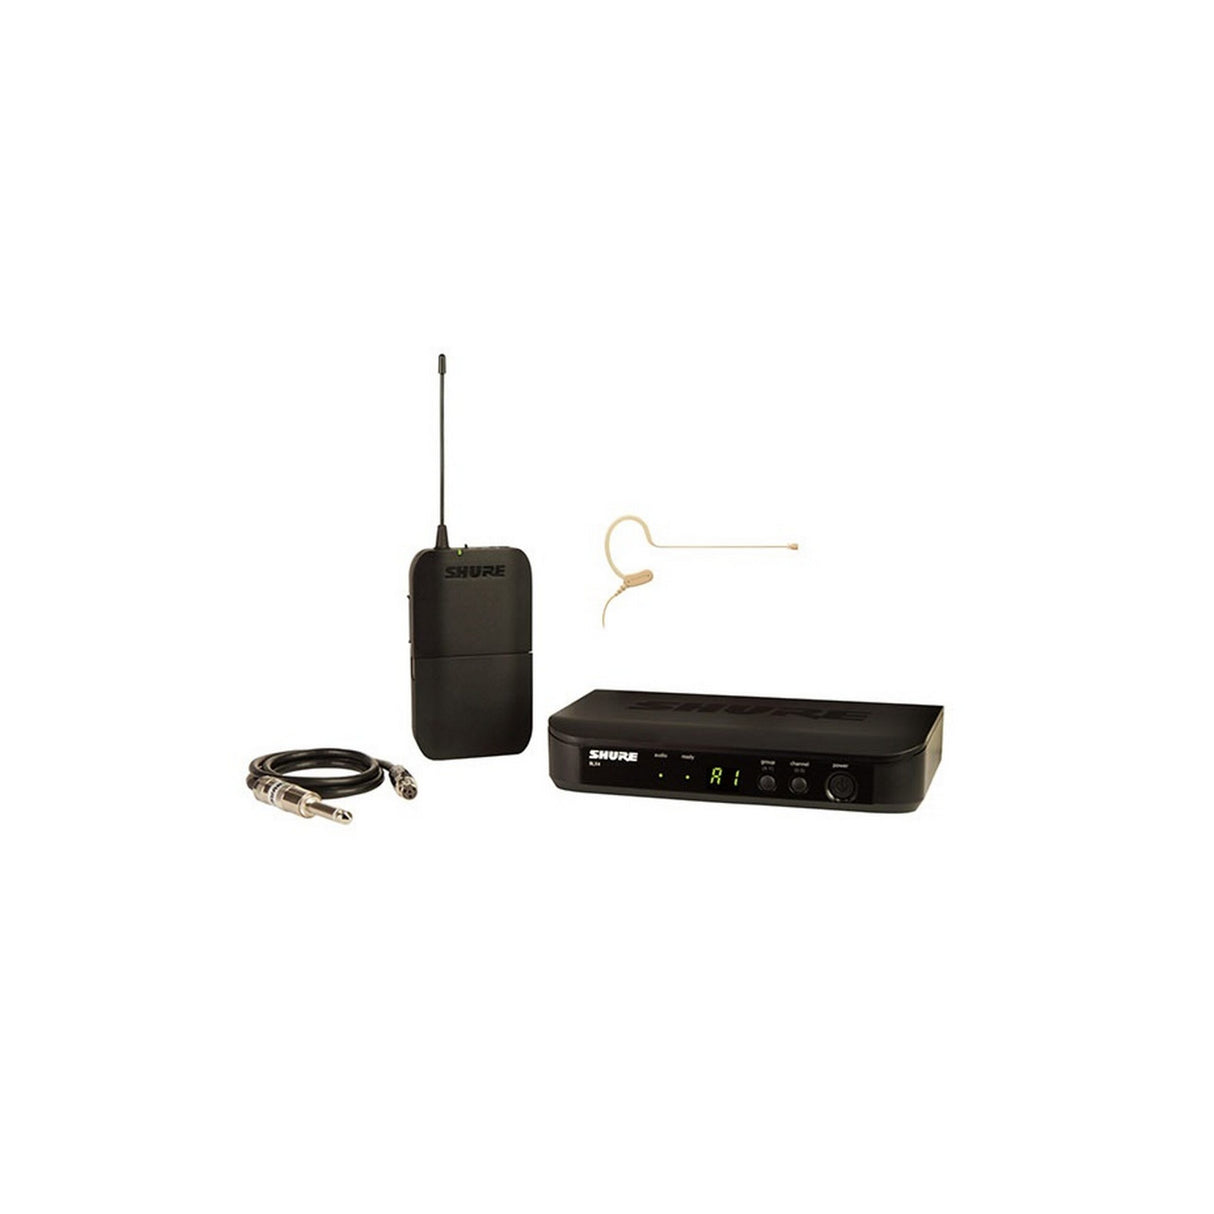 Shure BLX14-MX153T/O-TQG Omnidirectional Earset Wireless Guitar Microphone System, H11 572-596 MHz